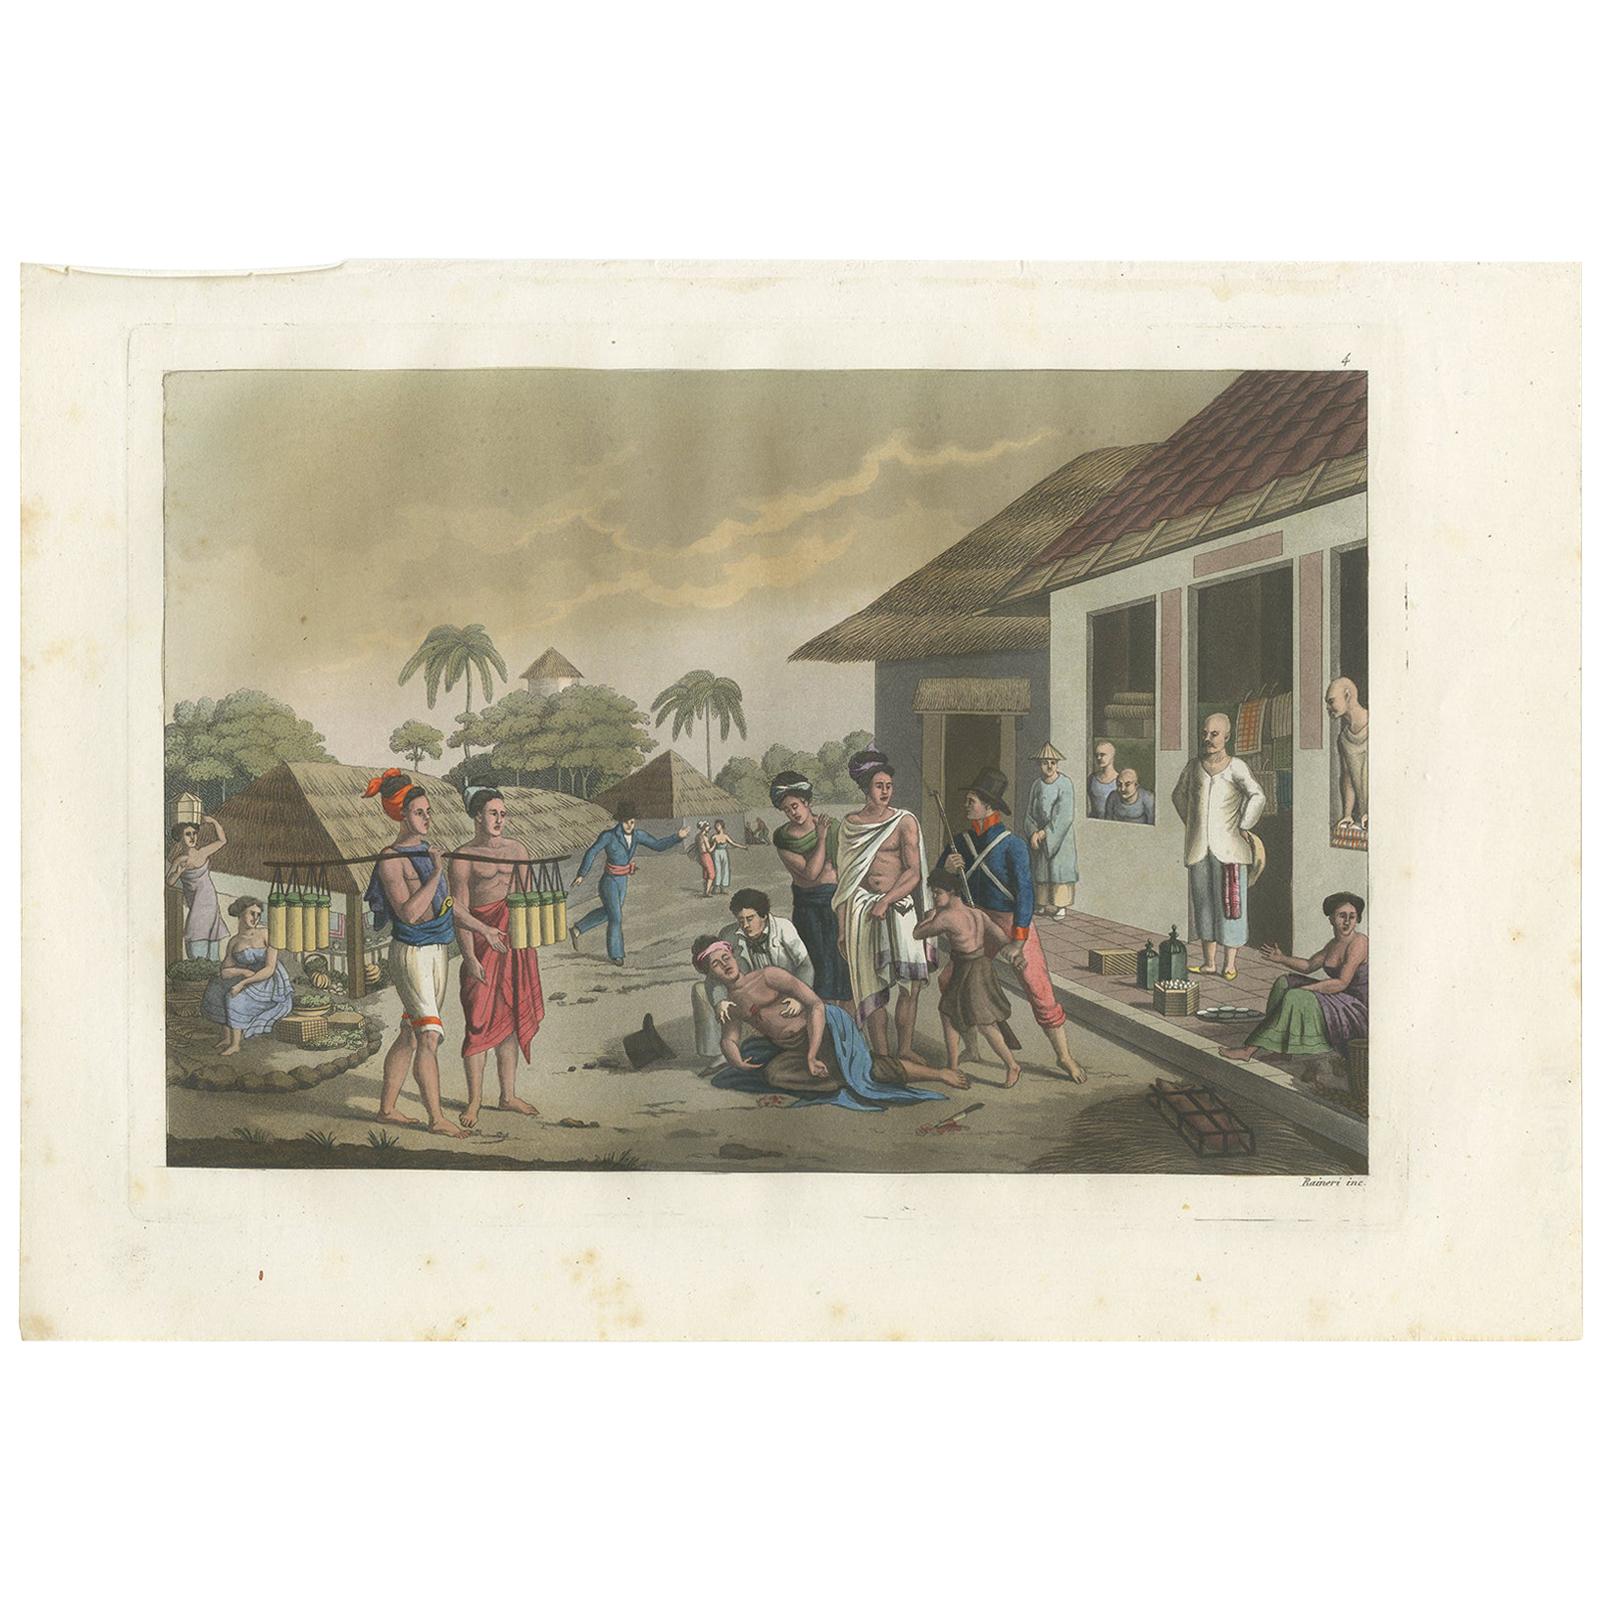 Antique Print of a Bazaar in Kupang, East TImor, by Ferrario, '1831'